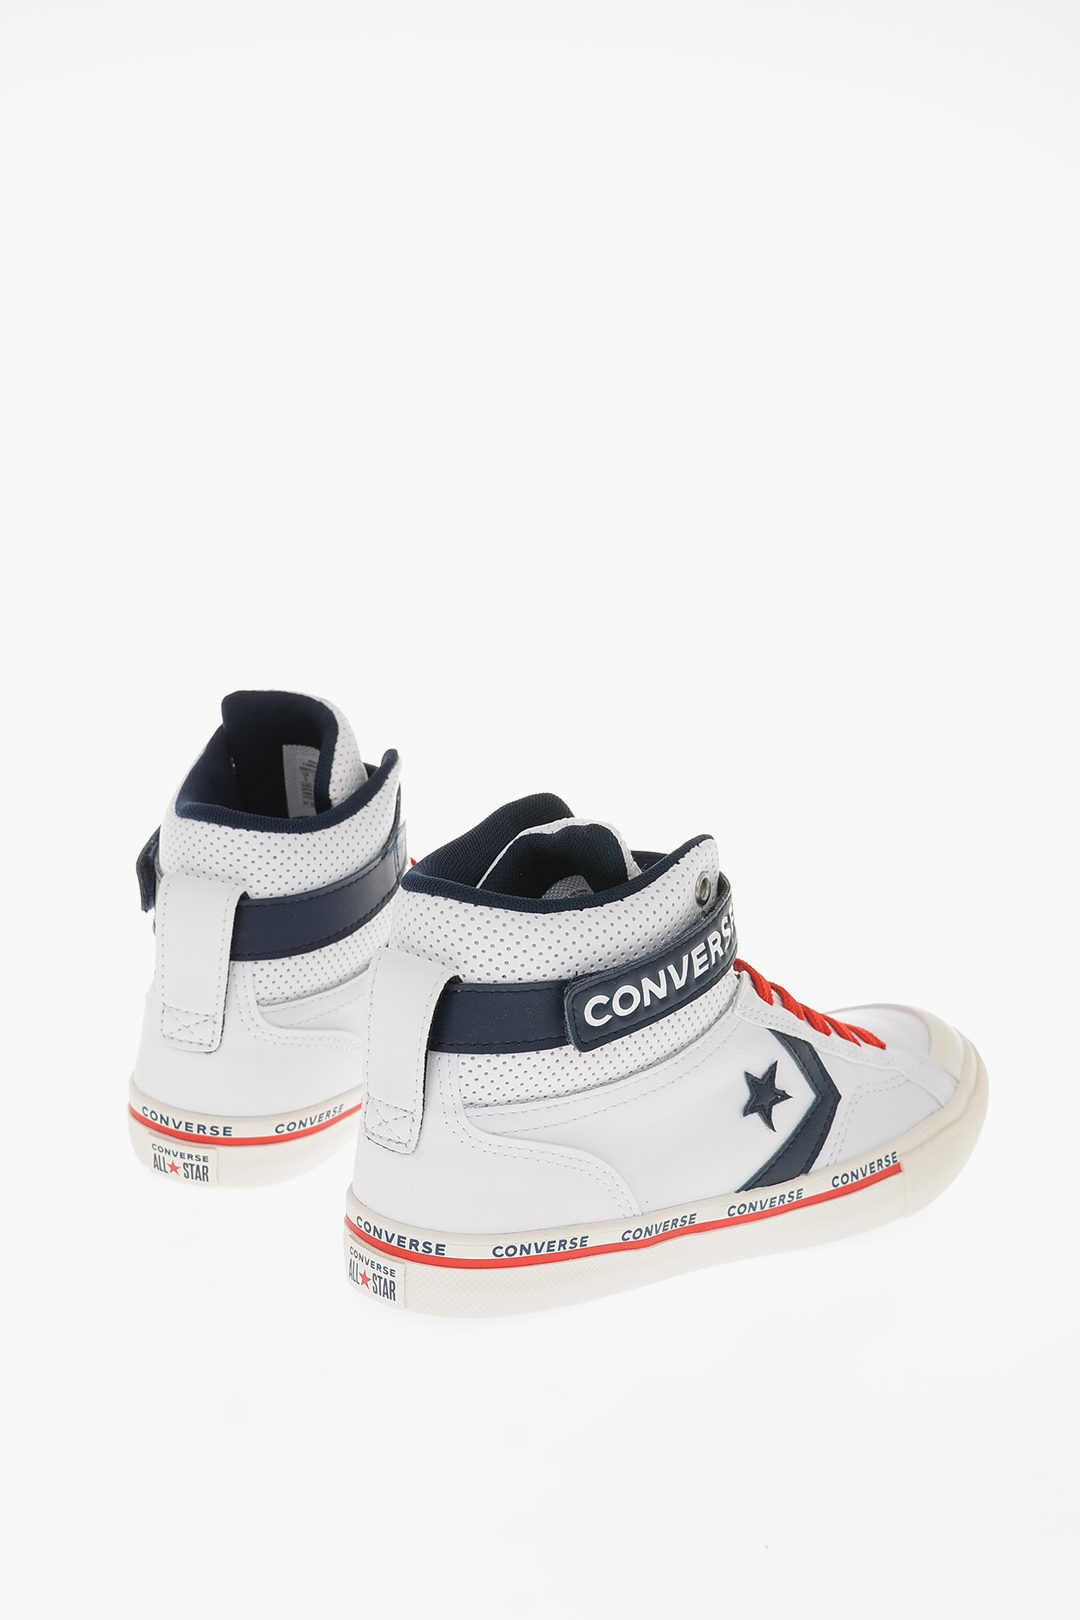 Formode søsyge knap Converse KIDS Faux Leather High-top Sneakers boys - Glamood Outlet